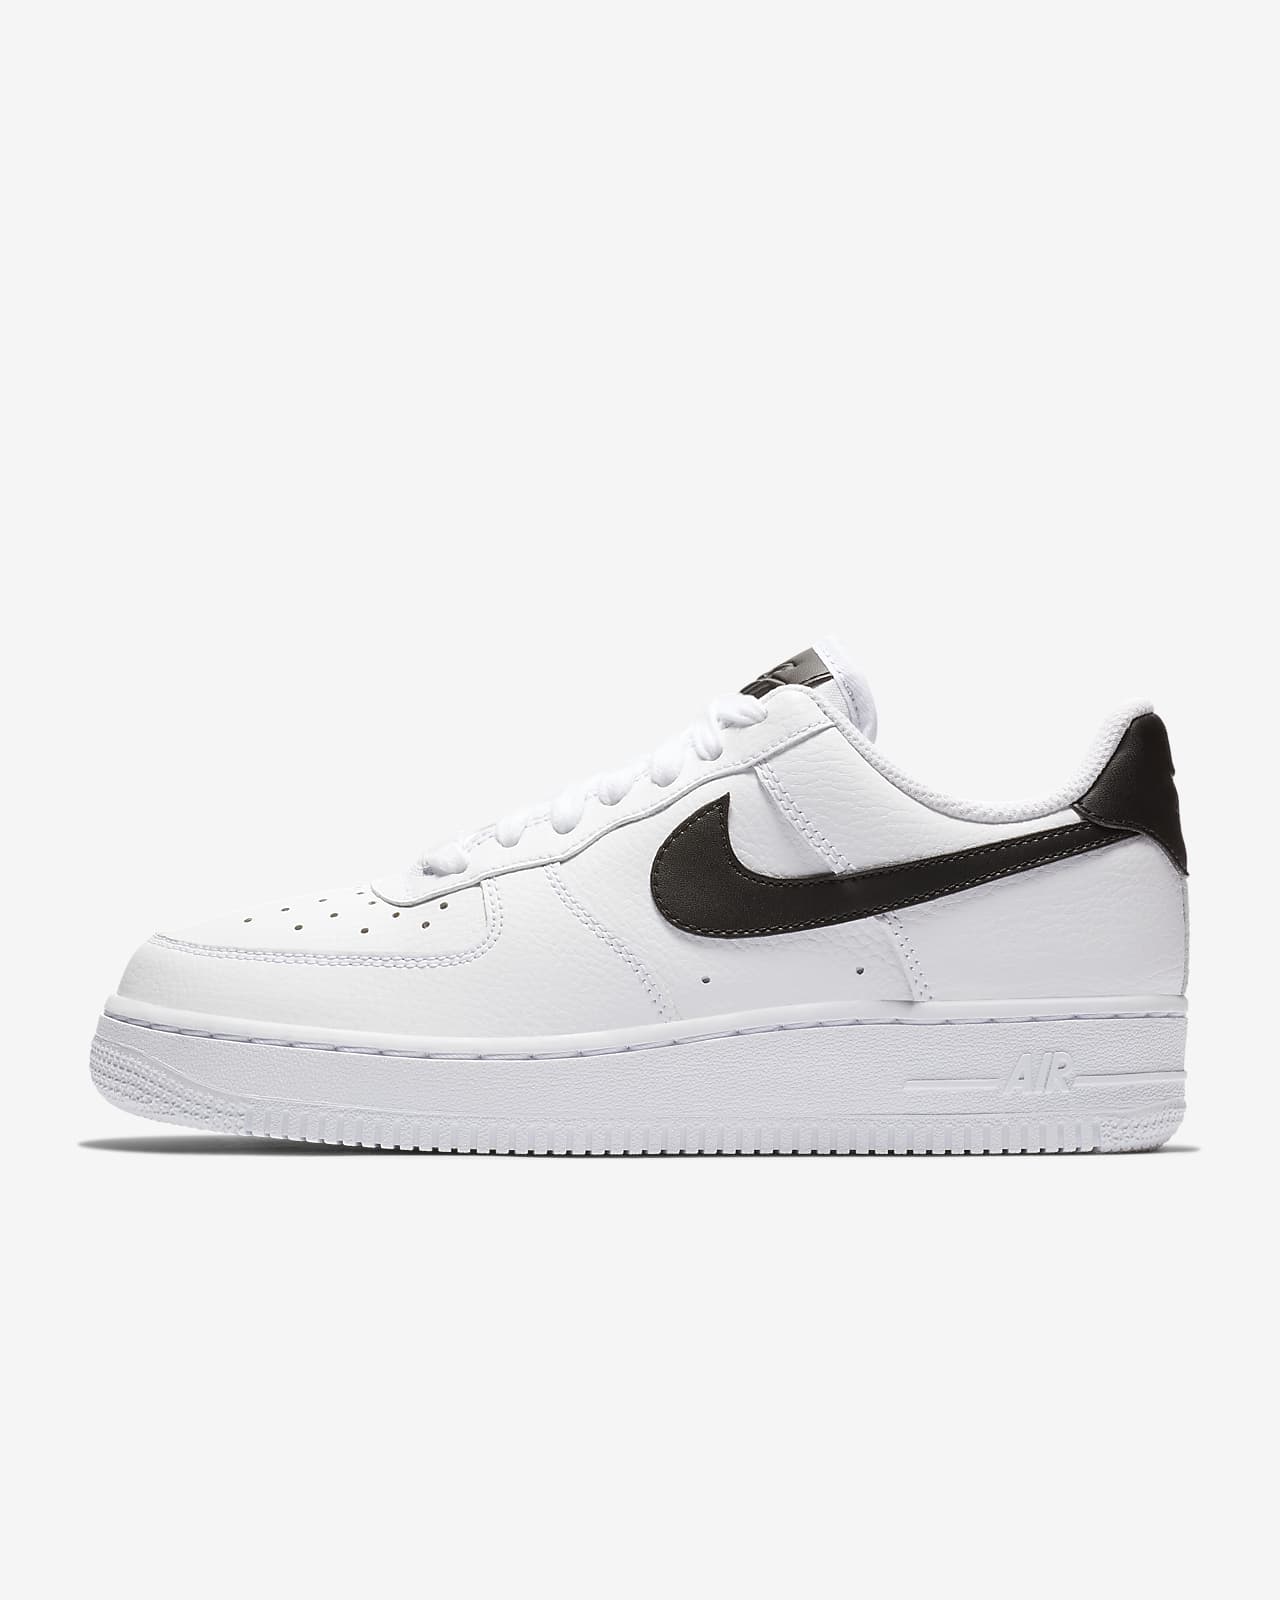 air force one negros con blanco